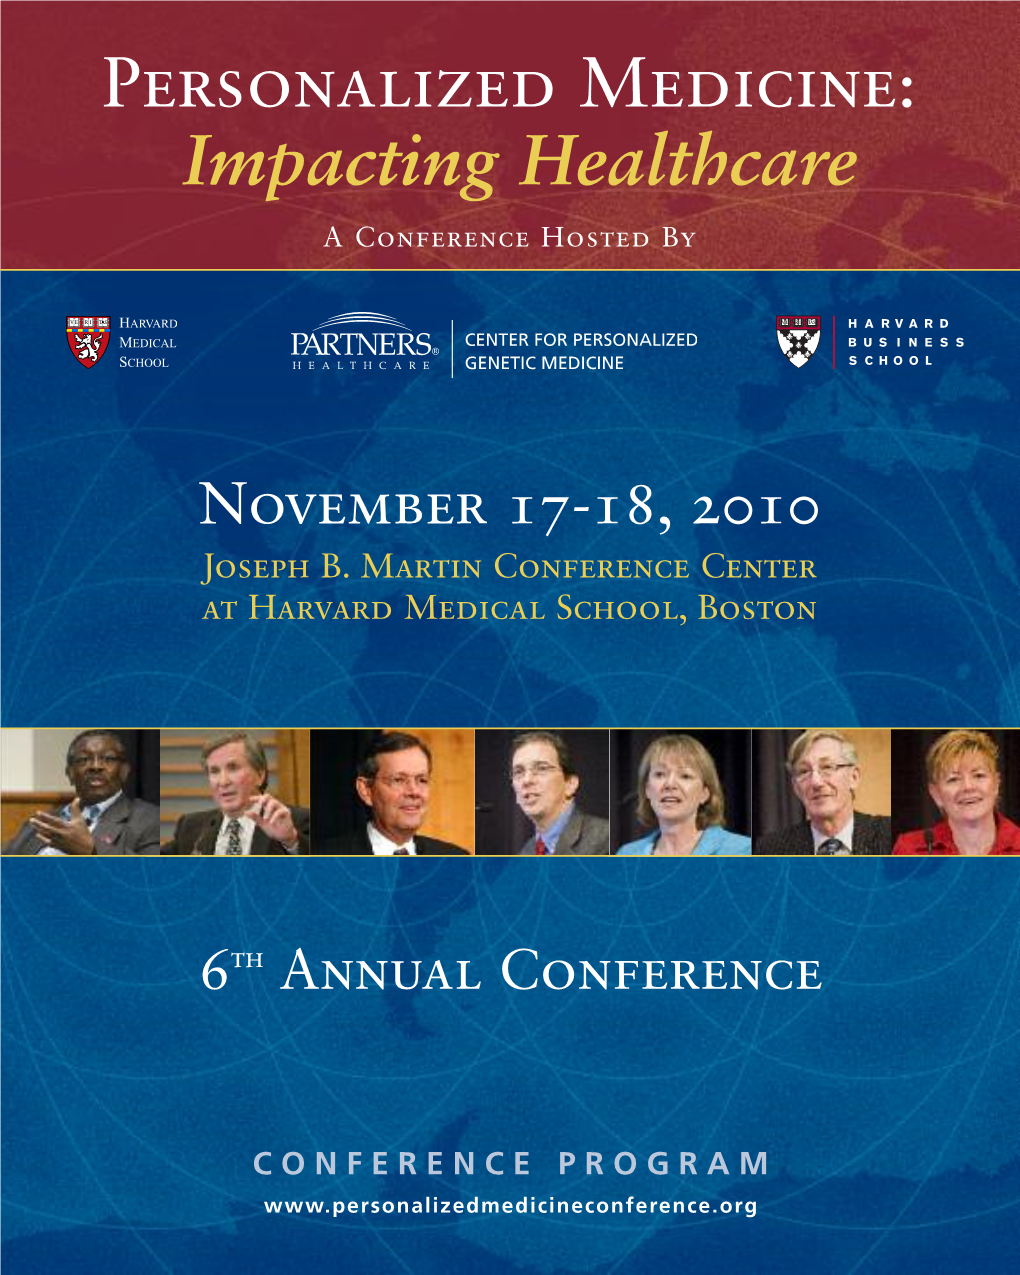 Impacting Healthcare a Conference Hosted By